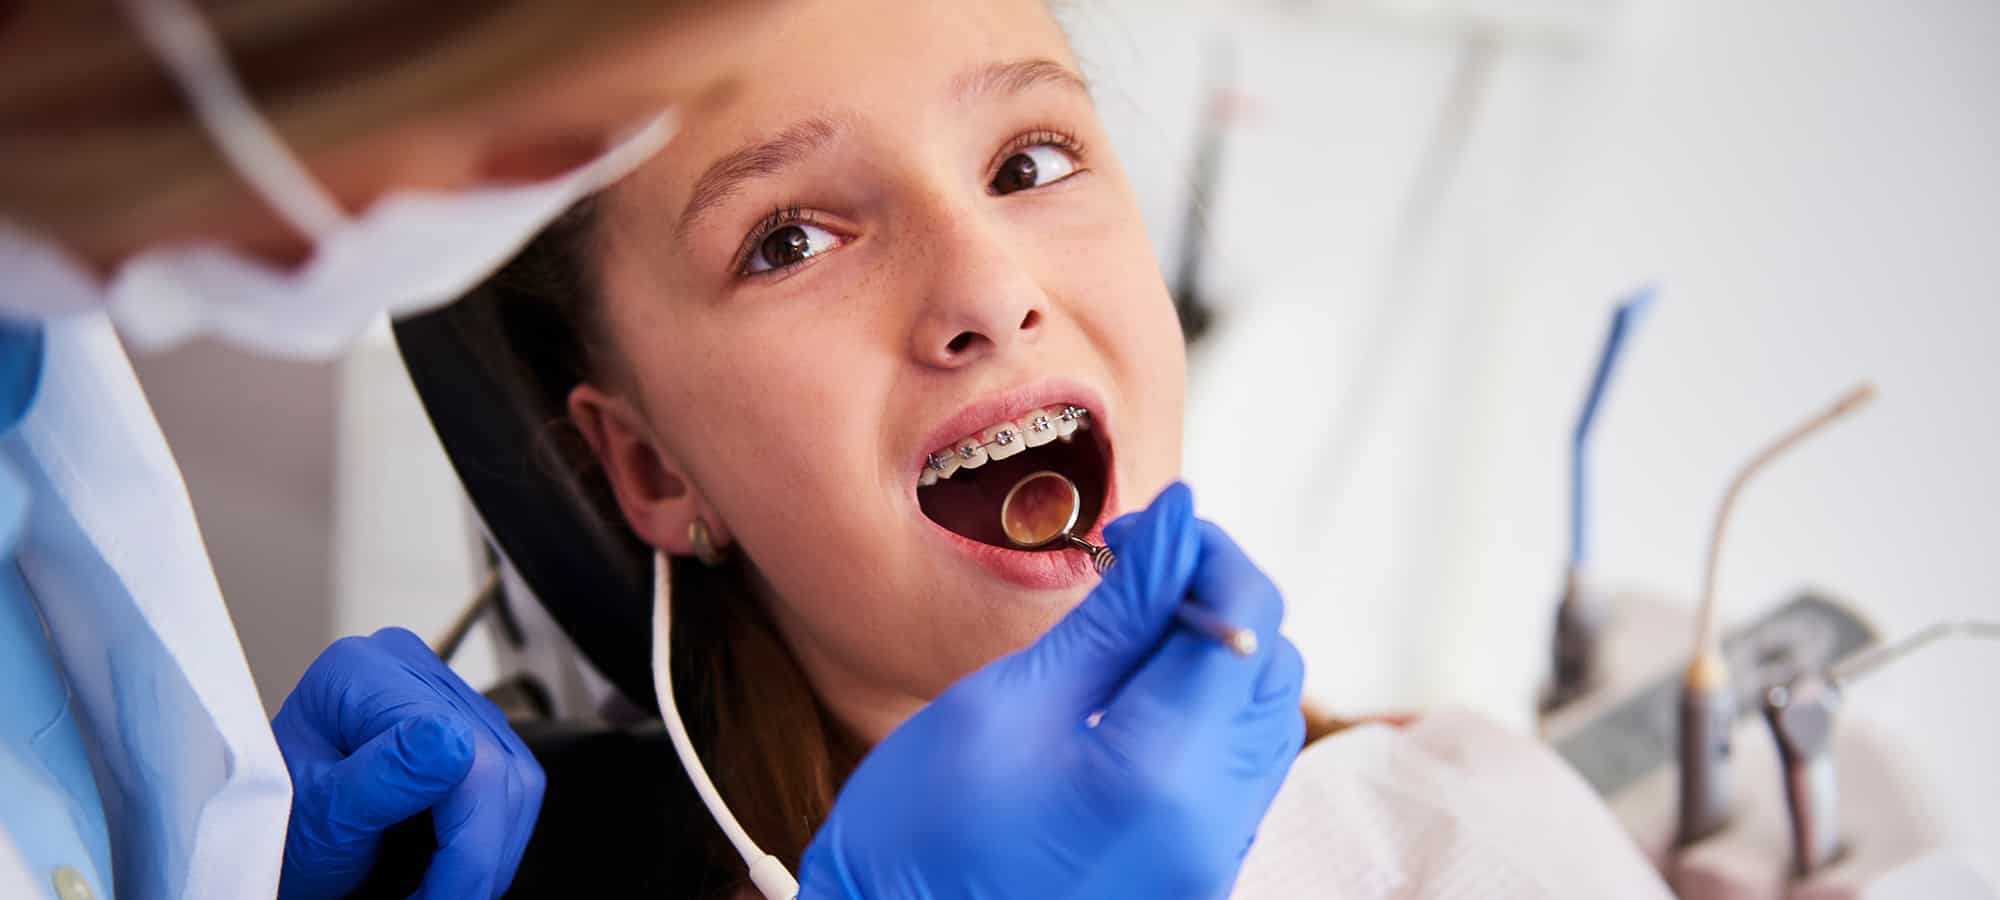 When Should Your Child Visit the Orthodontist?